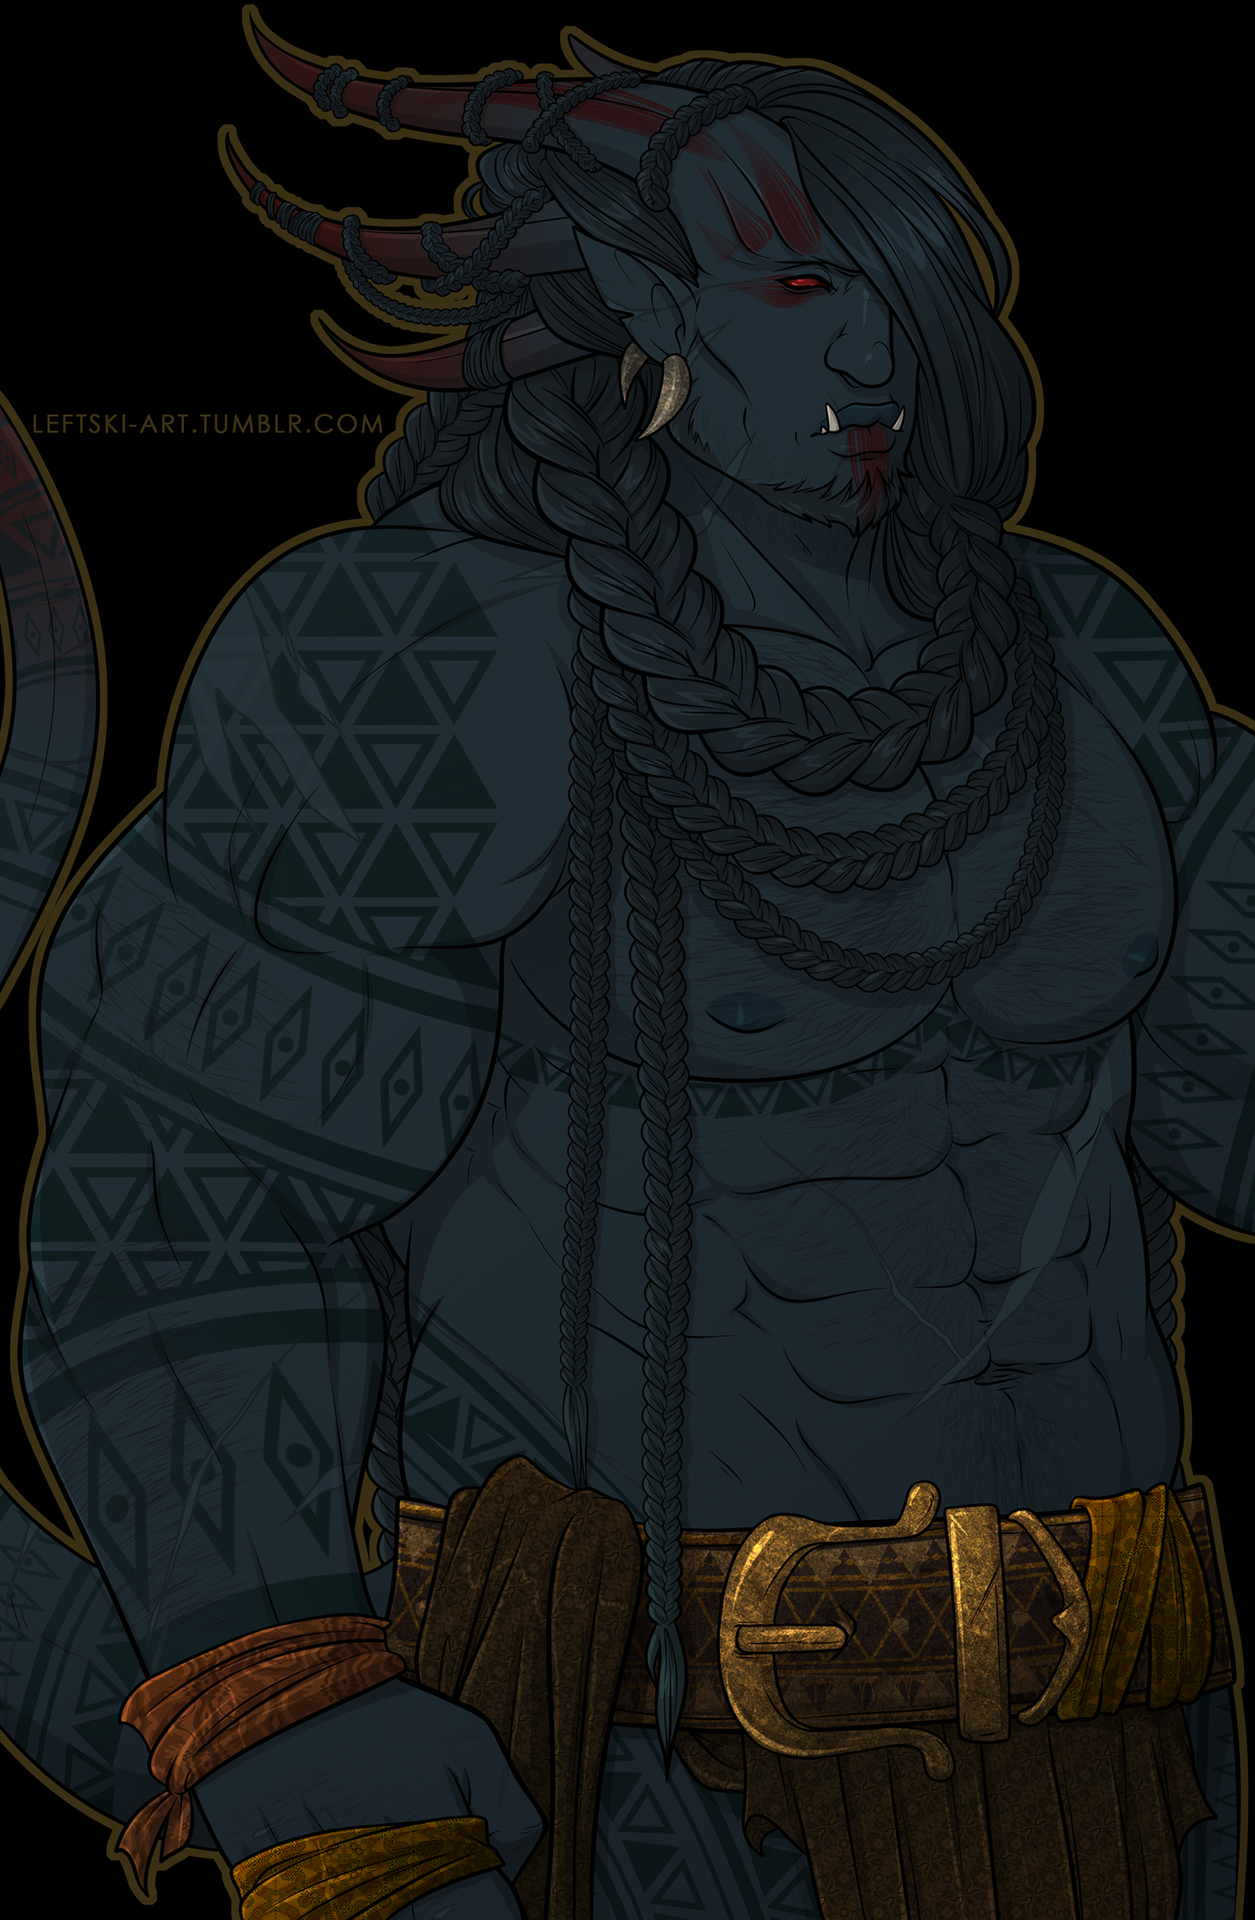 leftski-art:  What do you get when you cross a tiefling with an orc? This guy!